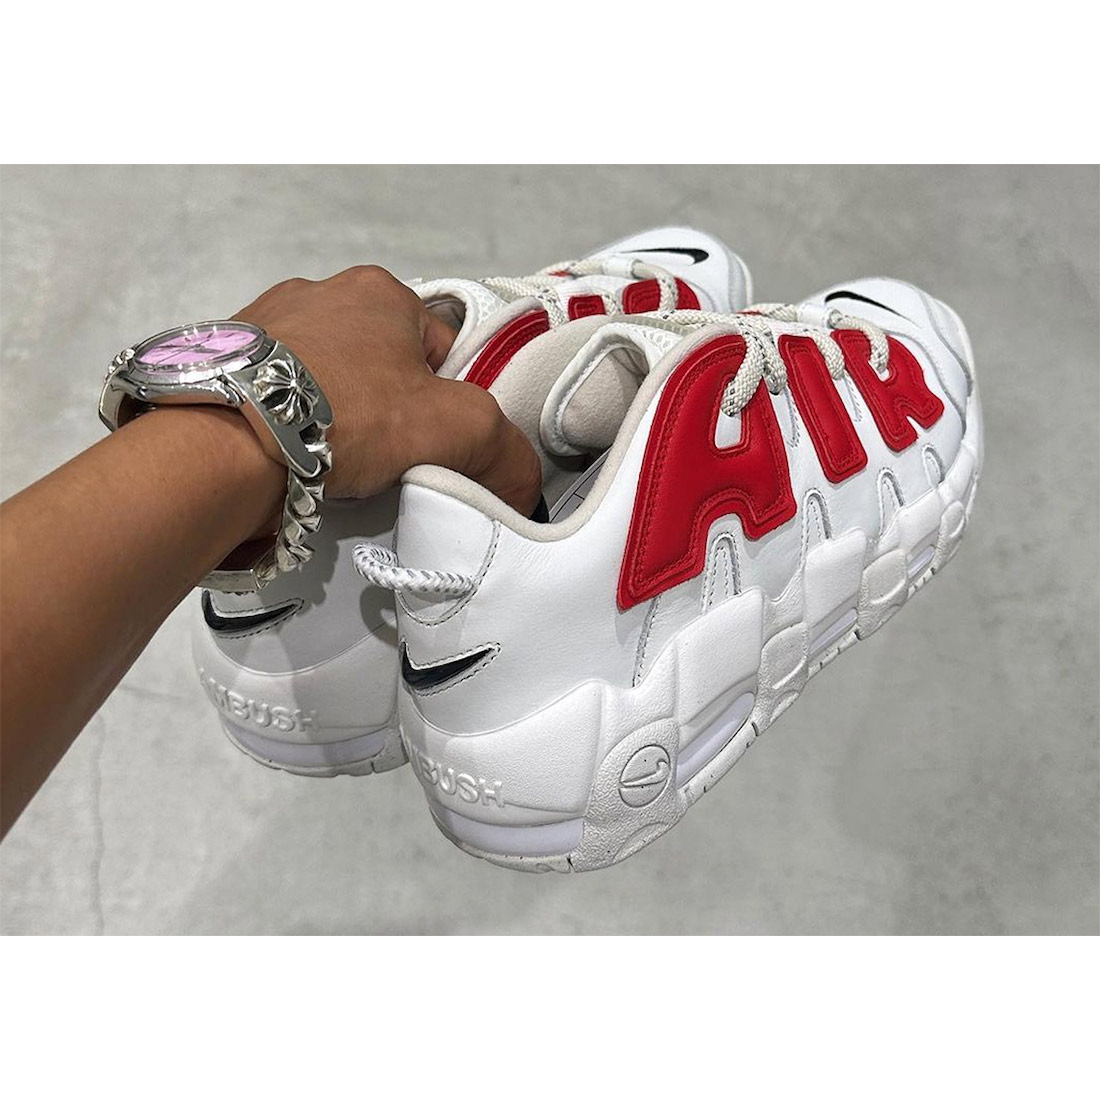 AMBUSH x all acg sandals nike ever made in america shoes “White/Red”